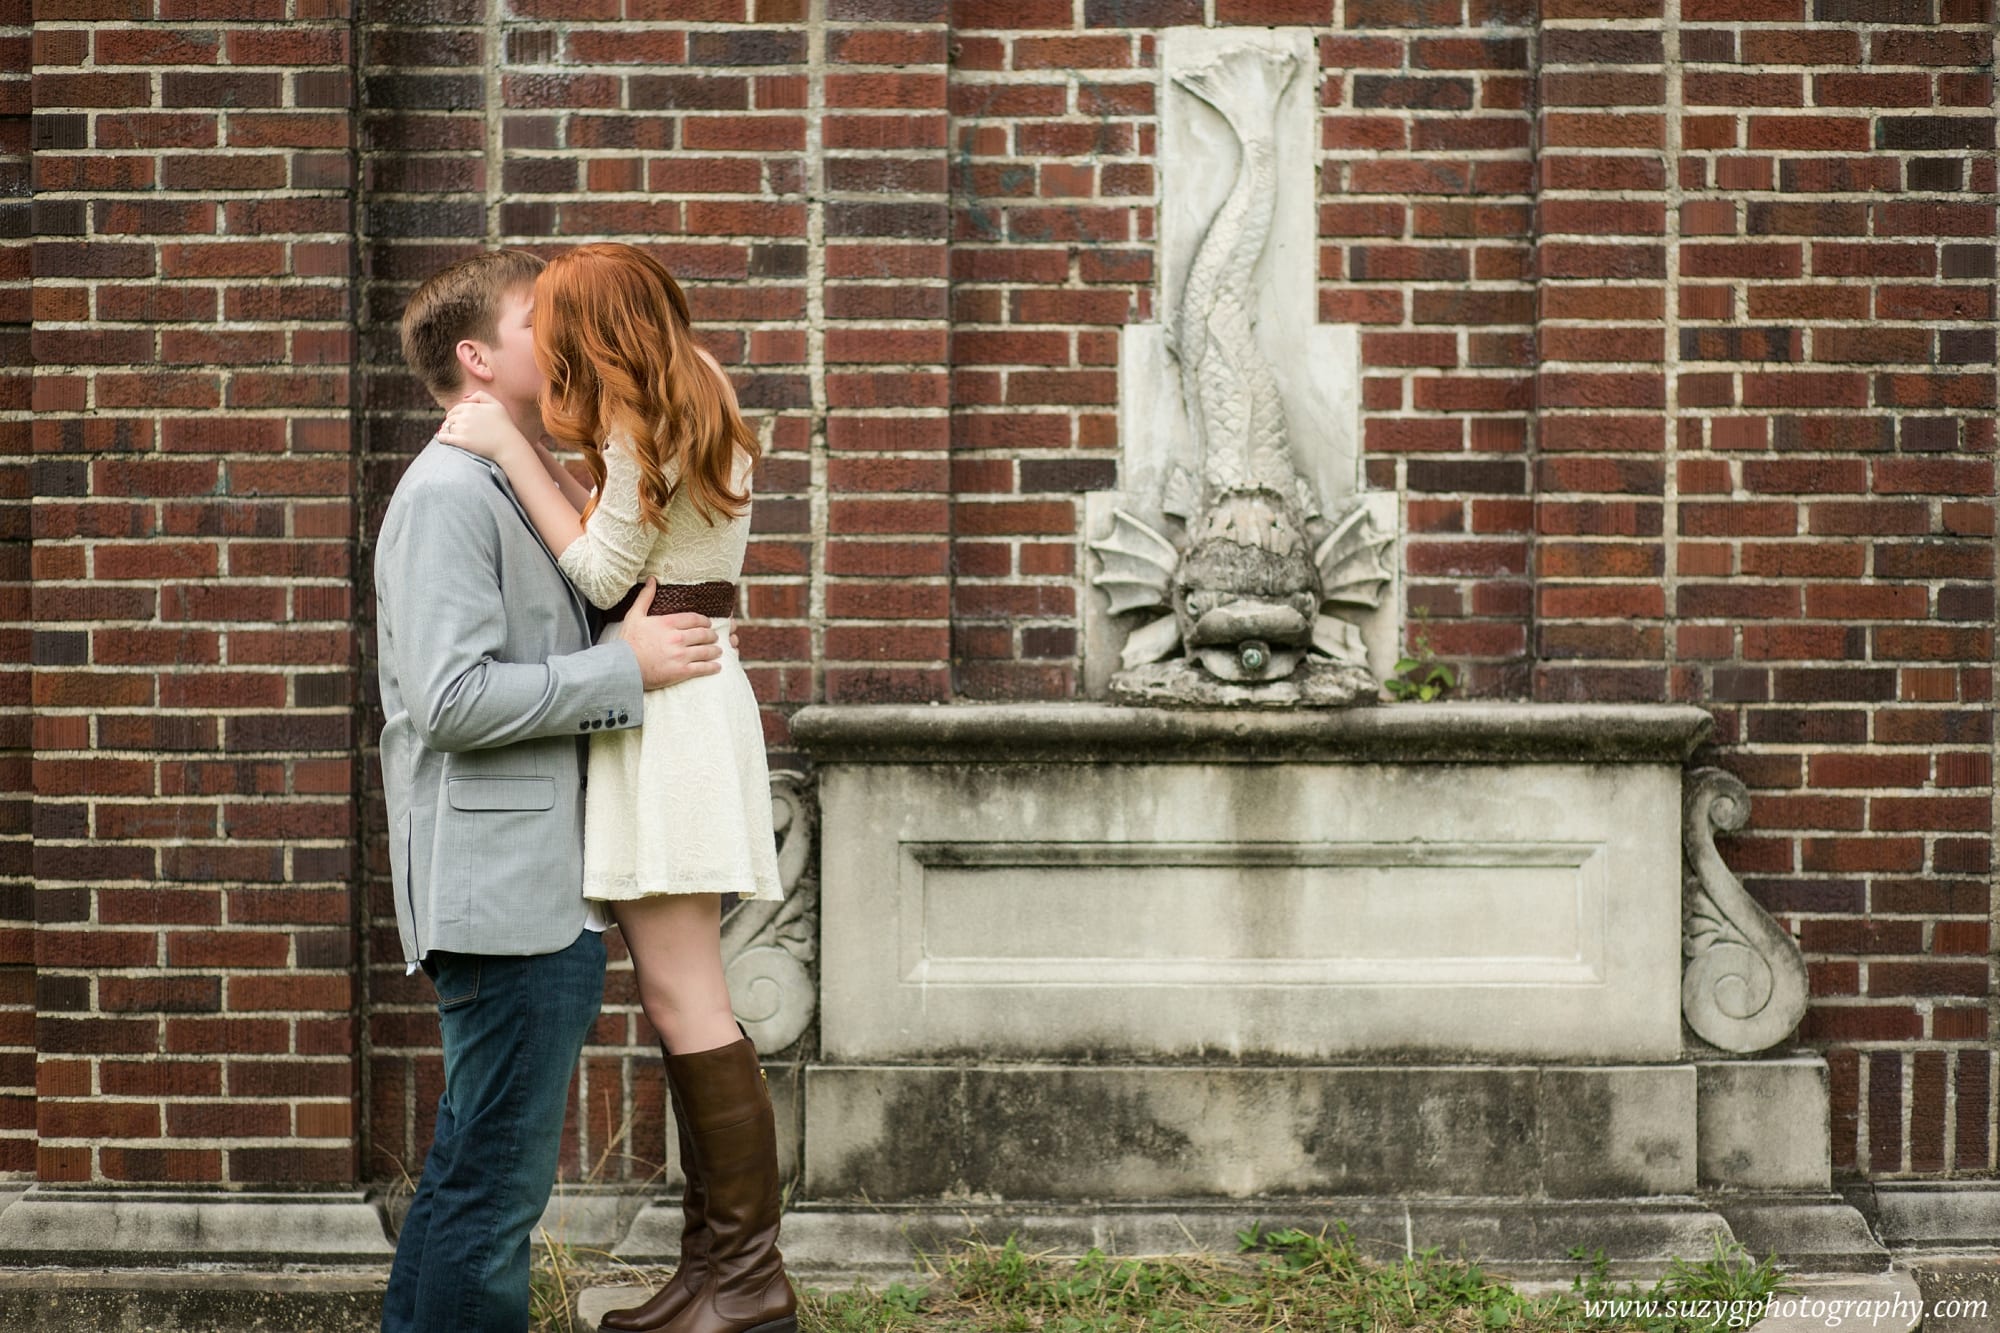 engagements-new orleans-texas-baton rouge-lake charles-suzy g-photography-suzygphotography_0121